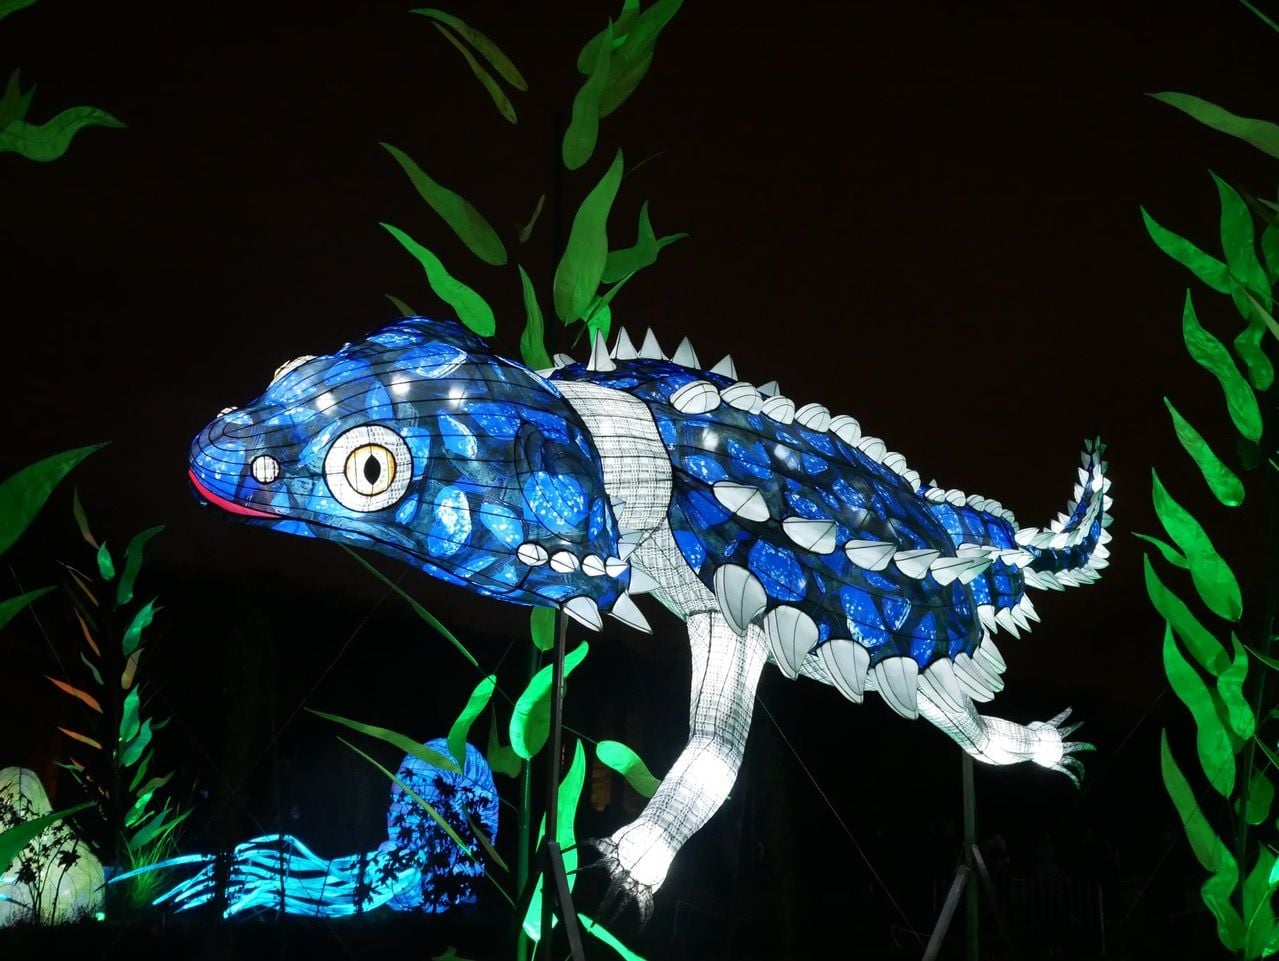 Vibrant sculptures of a prehistoric lizard featured in the Jardin des Plantes' 